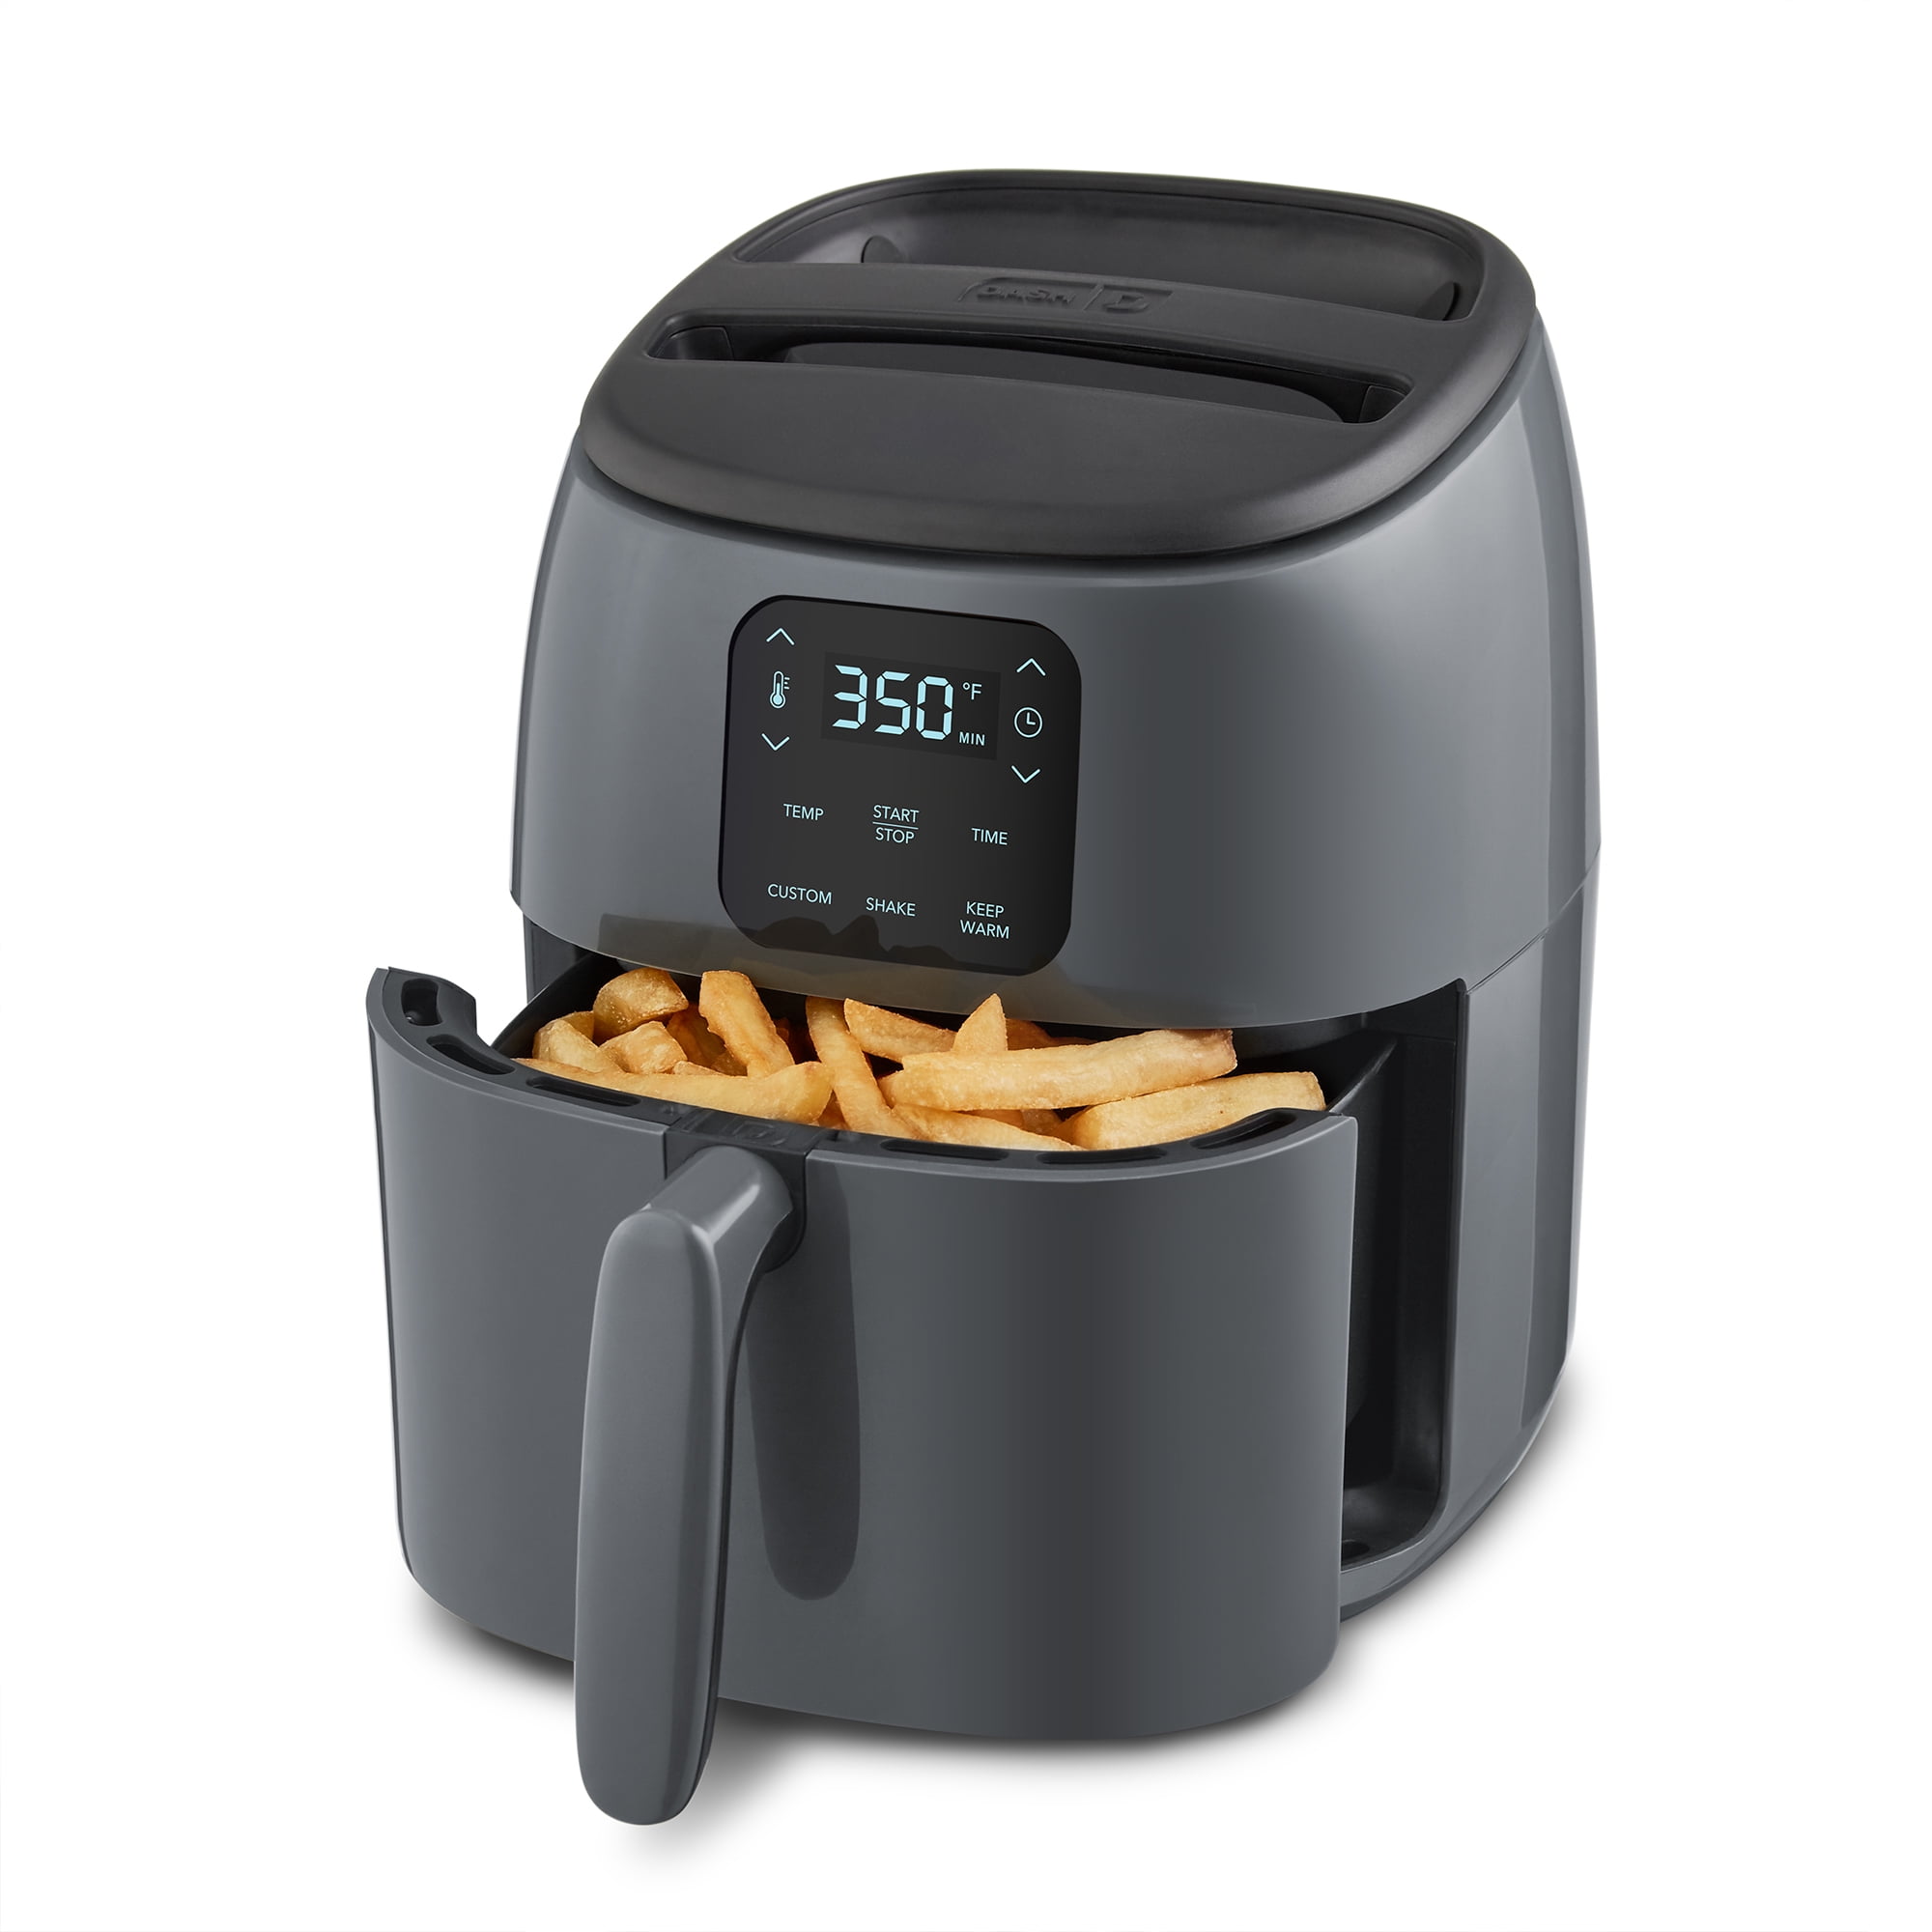 We love the compact Dash Tasti-Crisp Digital Air Fryer, and it's $20 off  exclusively on Prime Day